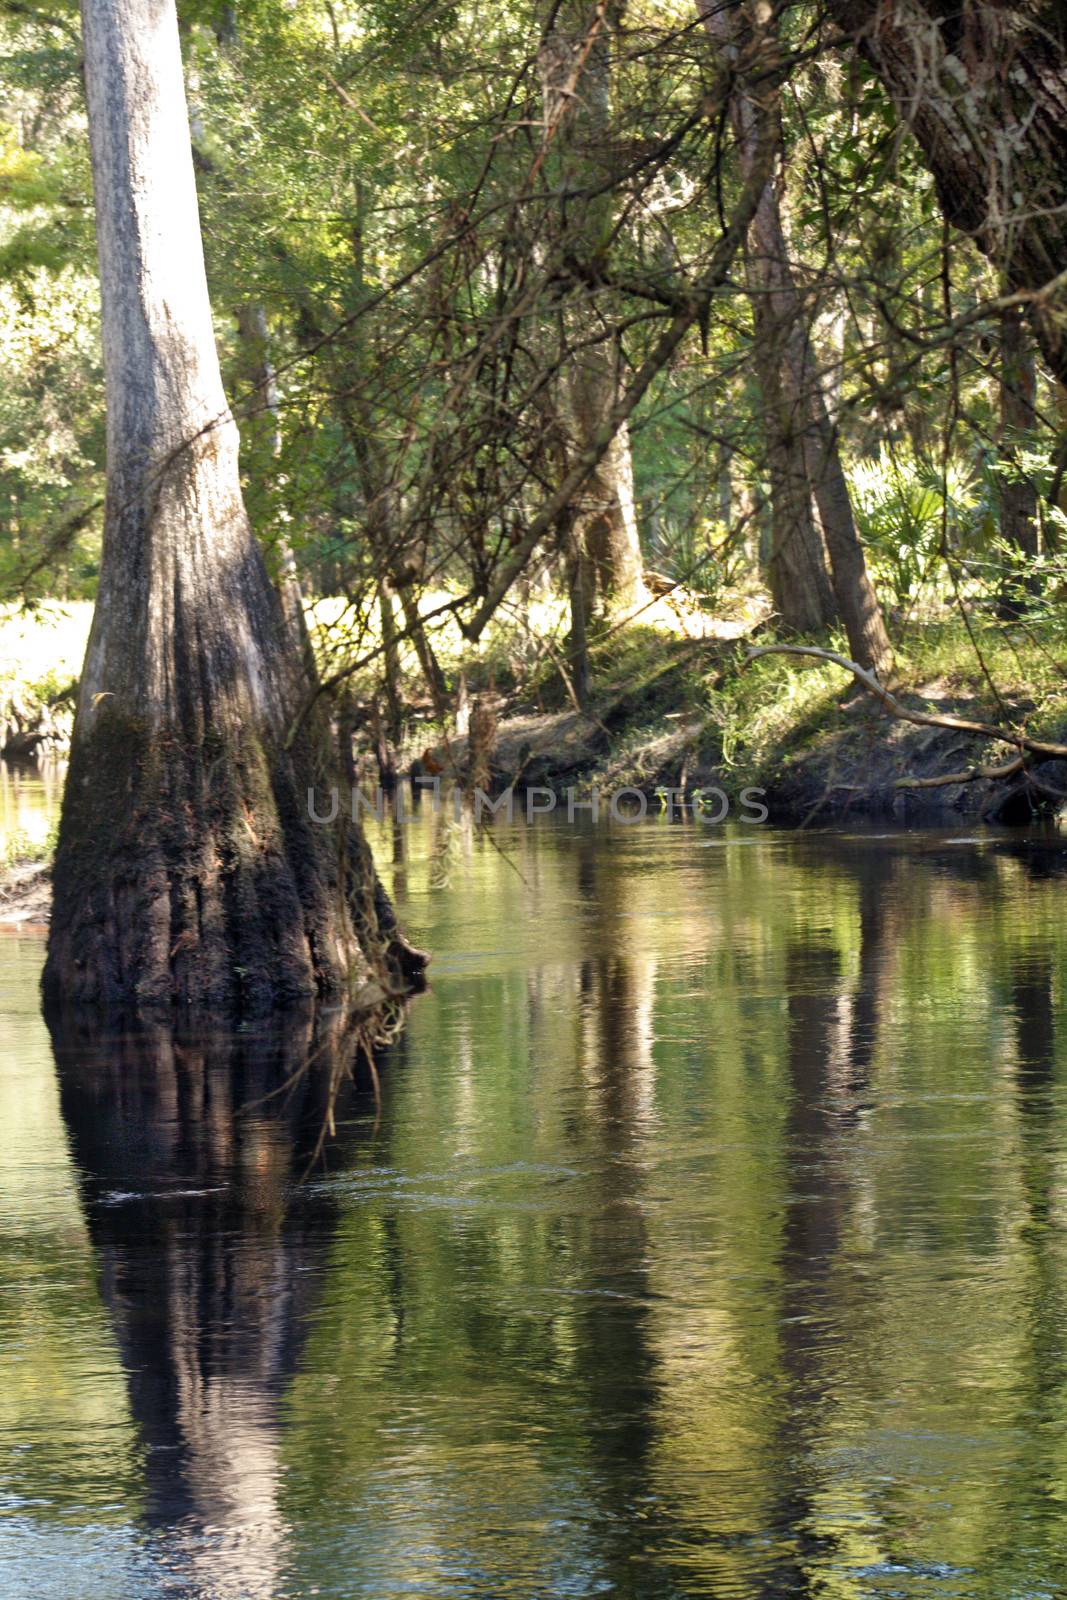 Cypress Tree in a Tropical River (3) by csproductions